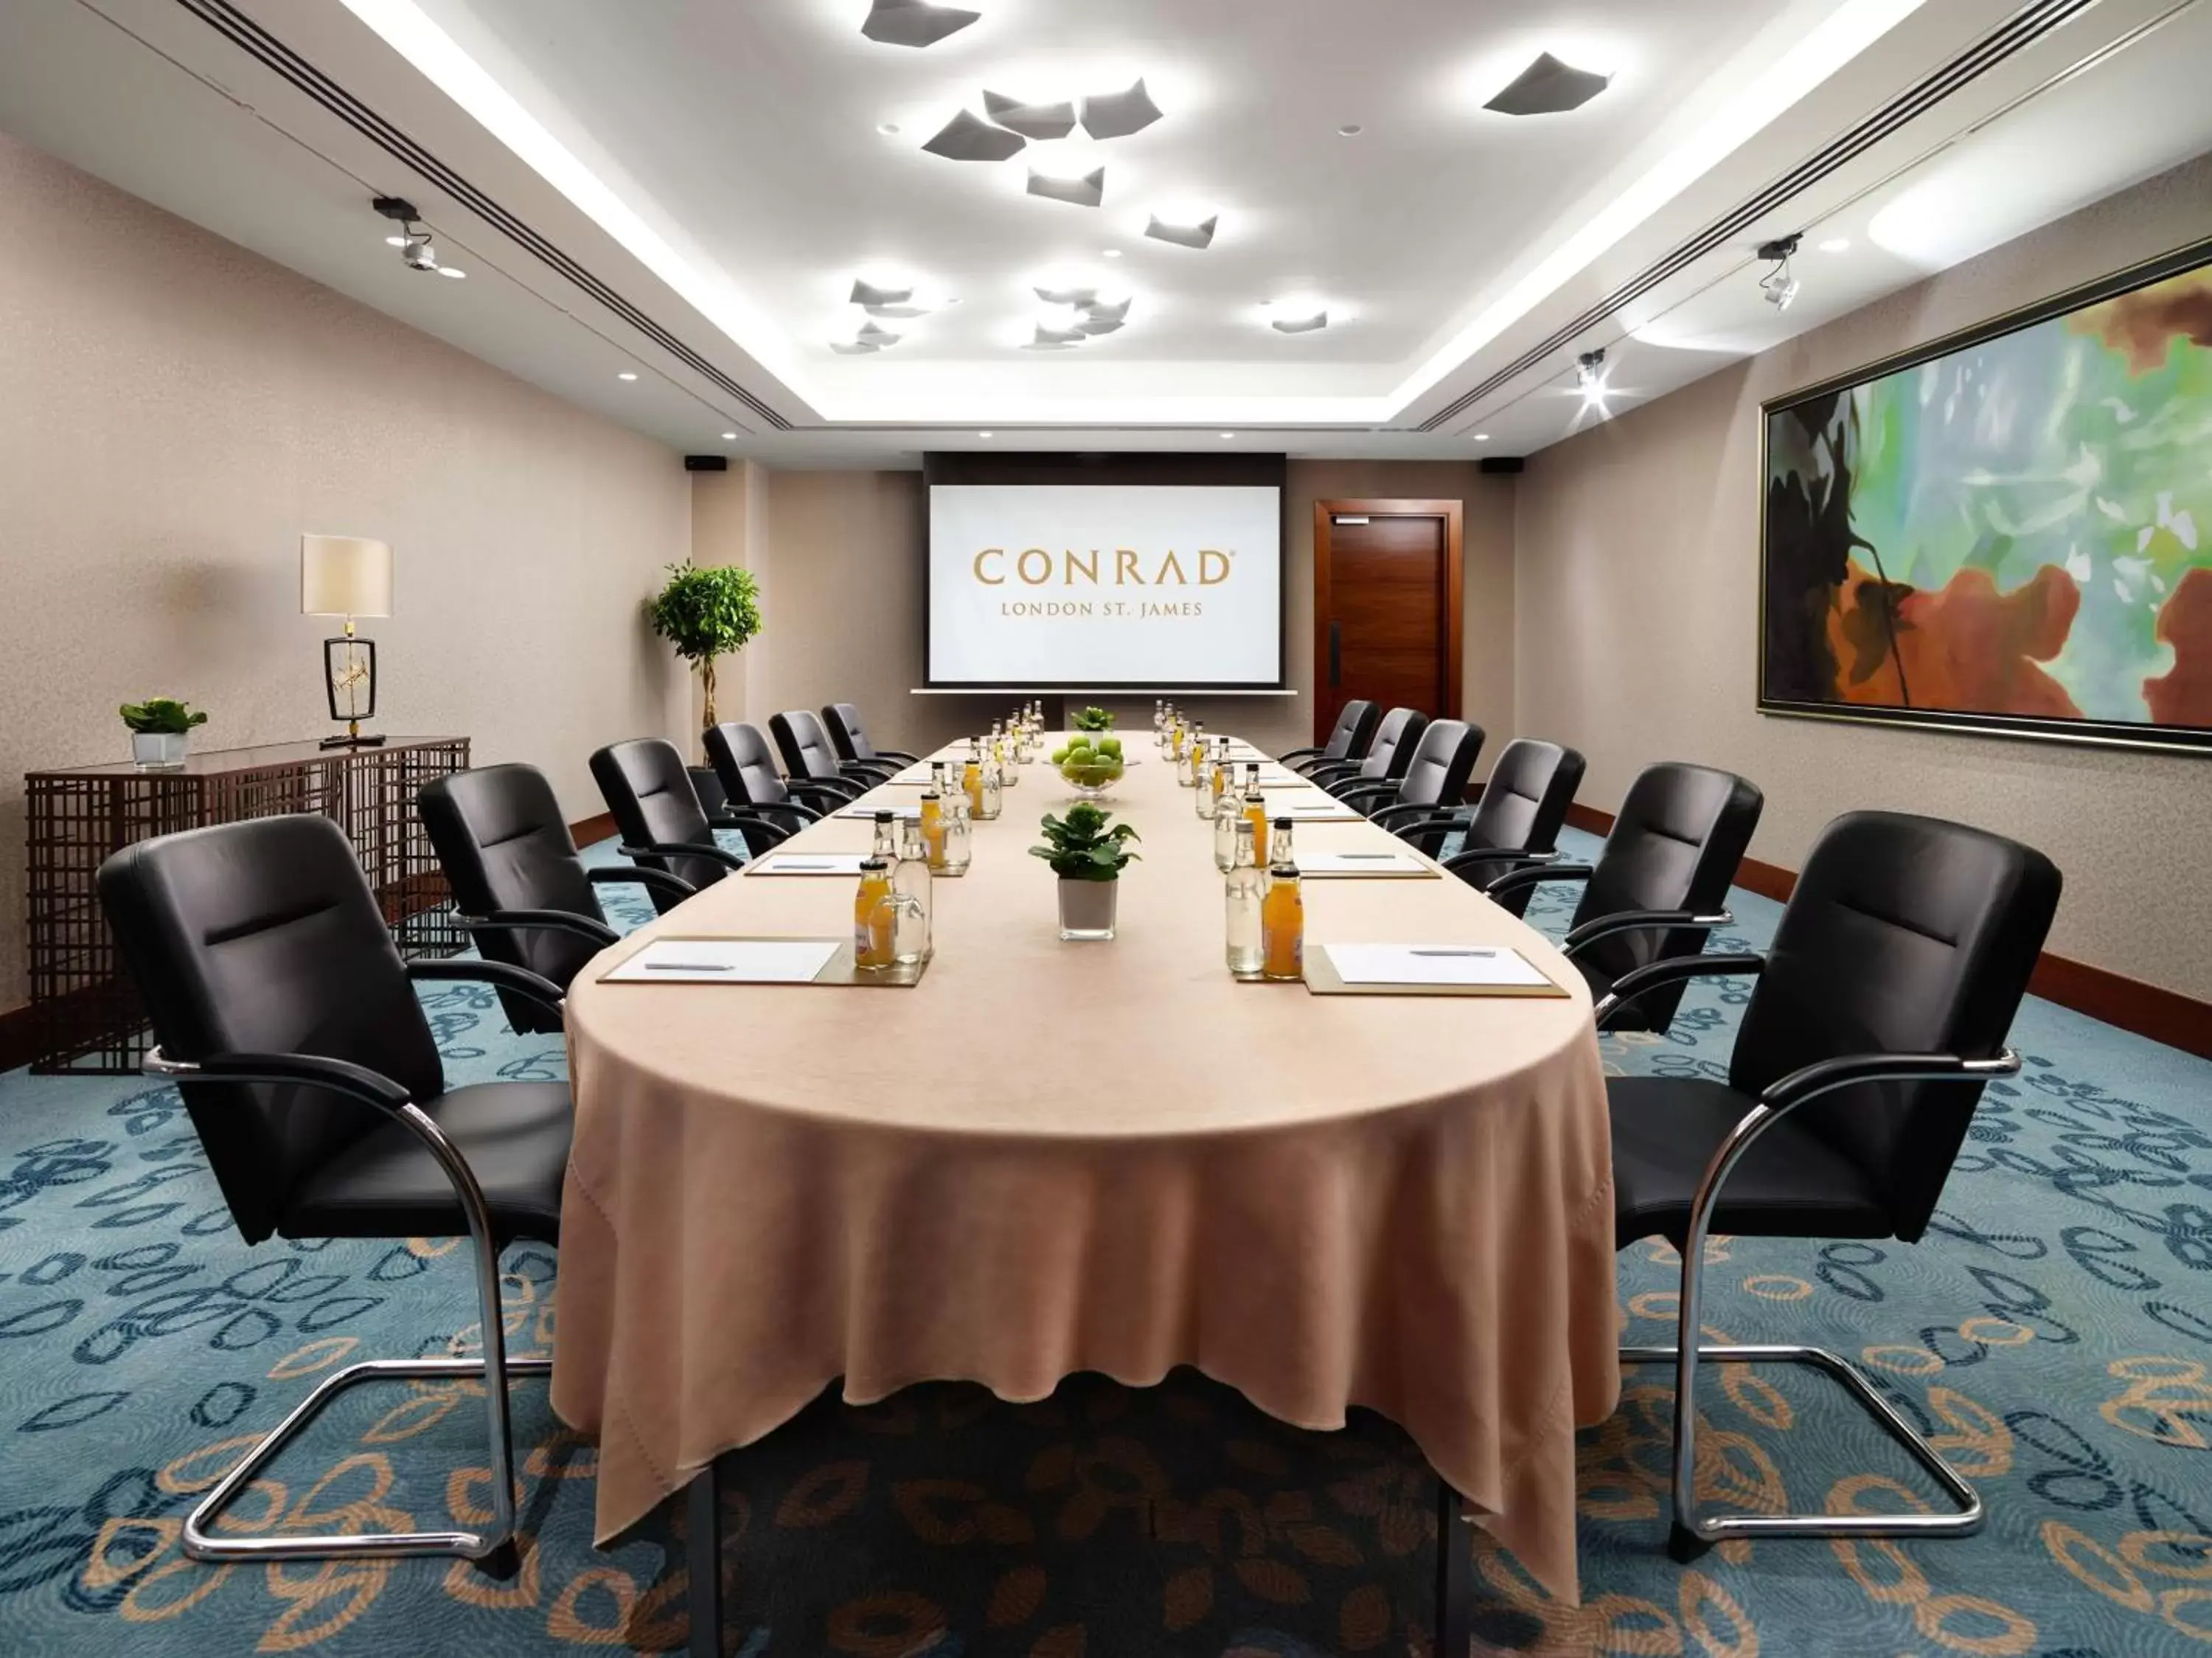 Meeting/conference room in Conrad London St James